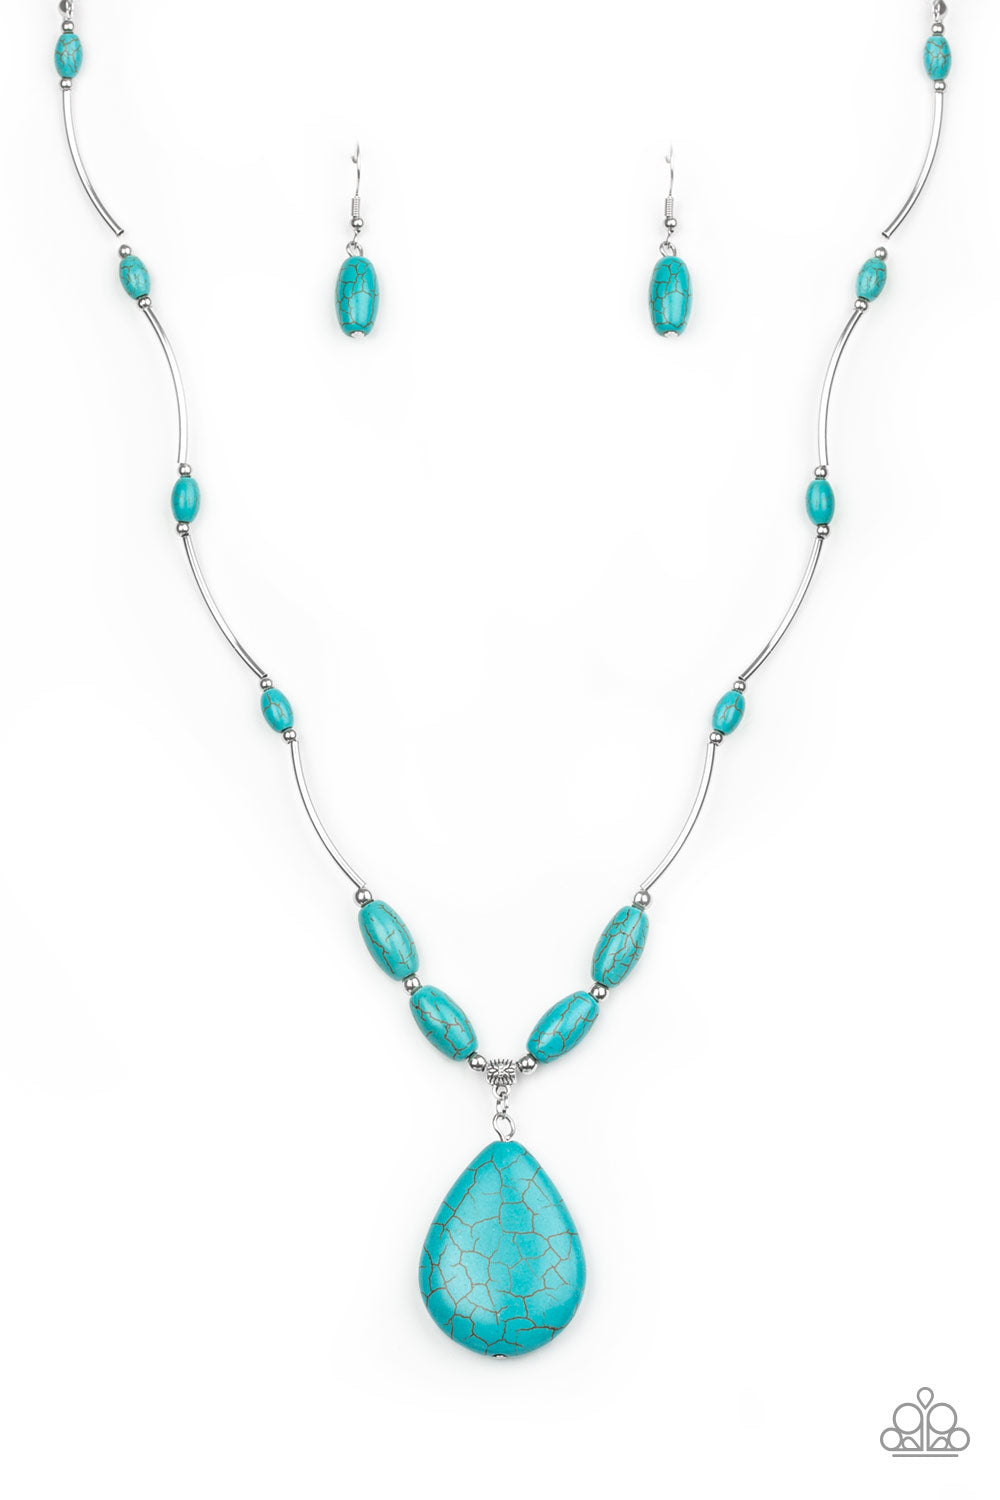 Necklace, Sensitive Skin, Hypoallergenic Jewelry, blue, turquoise, natural stones